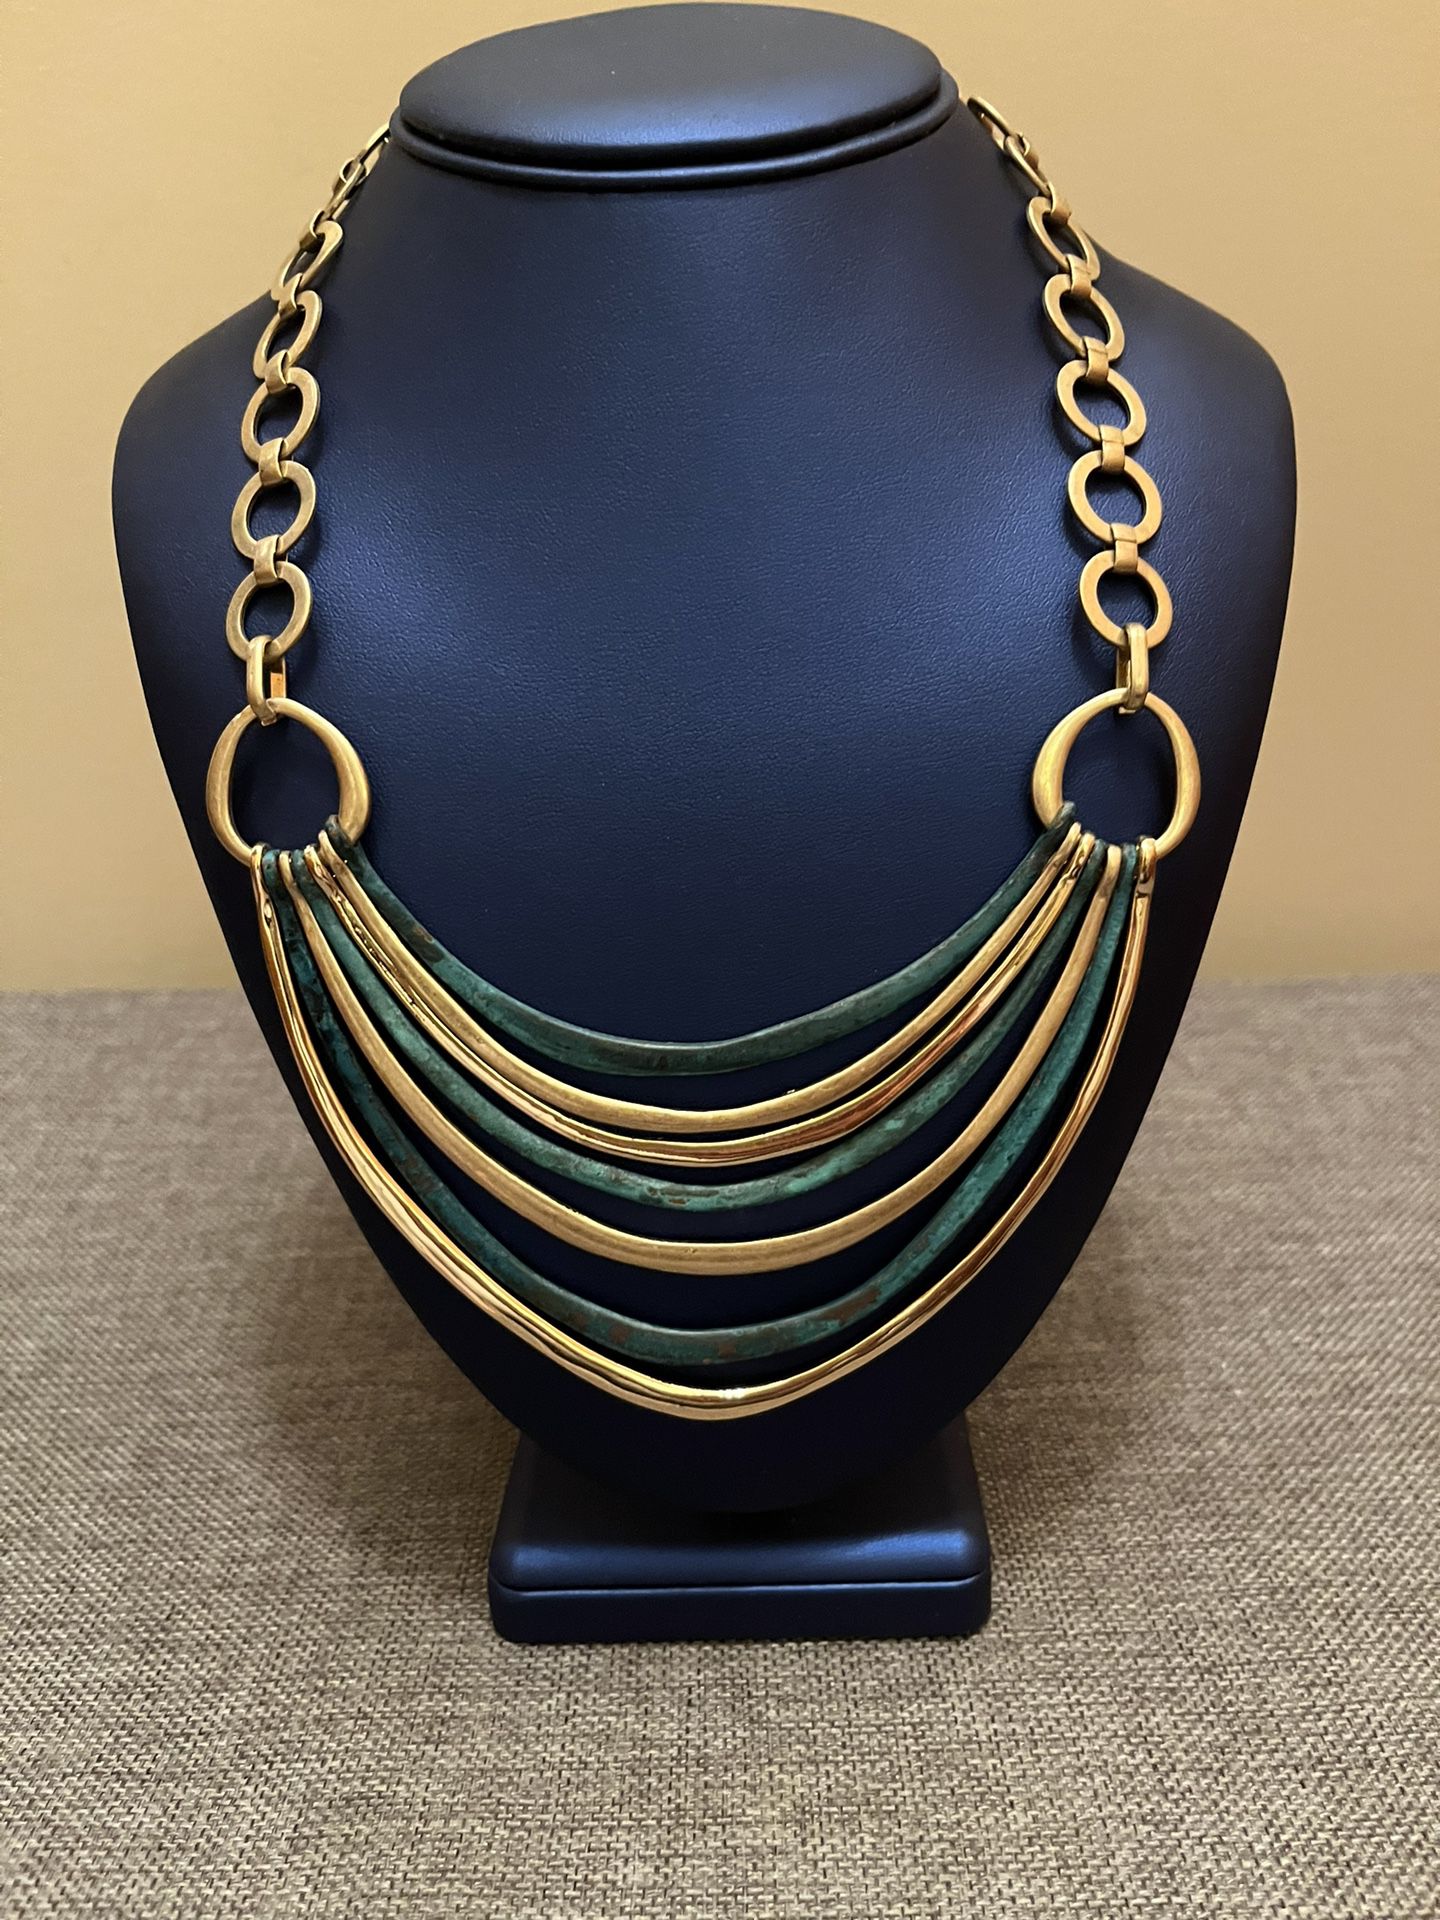 Robert Lee Morris Turquoise Fashion Necklace New. Very beautiful statement piece 